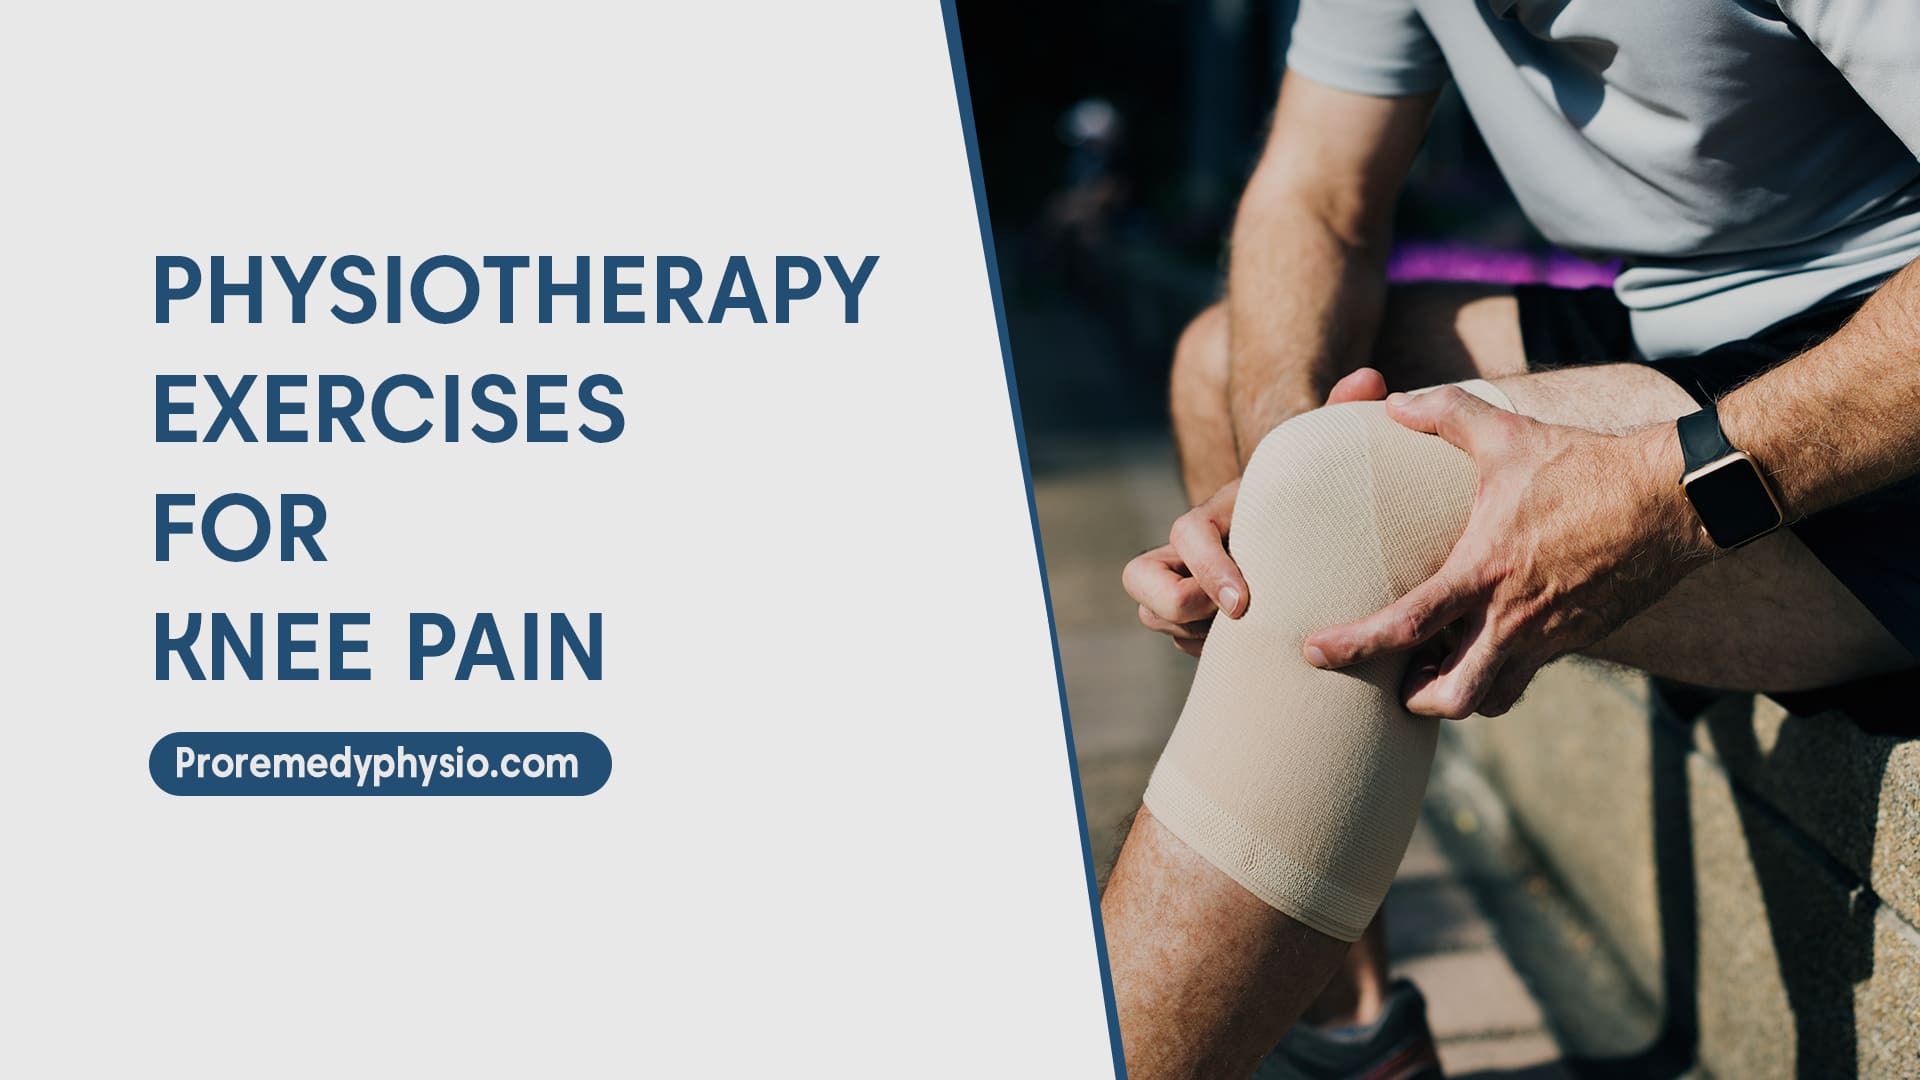 Physiotherapy Exercises for Knee Pain